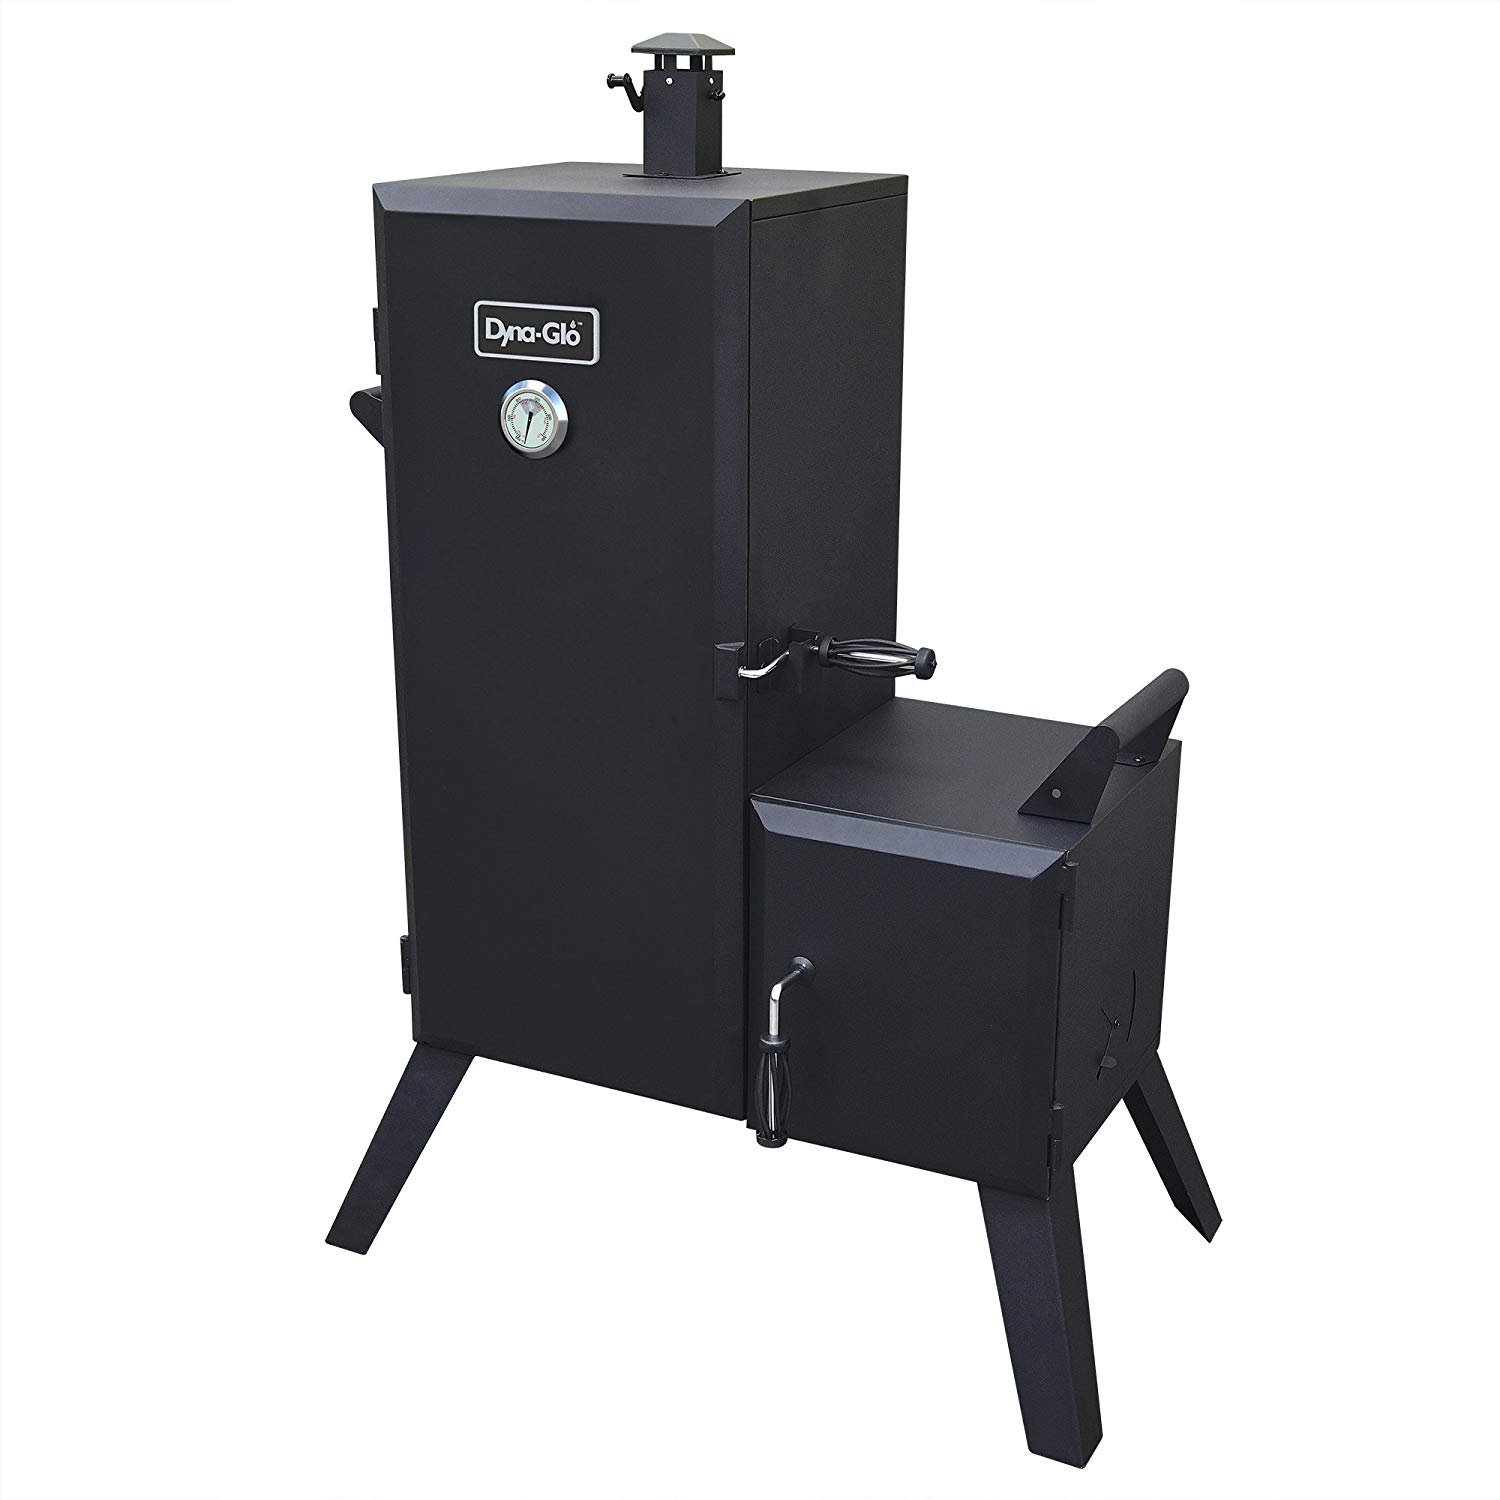 DynaGlo DGO1176BDCD Charcoal Offset Smoker Review Best Grill Reviews